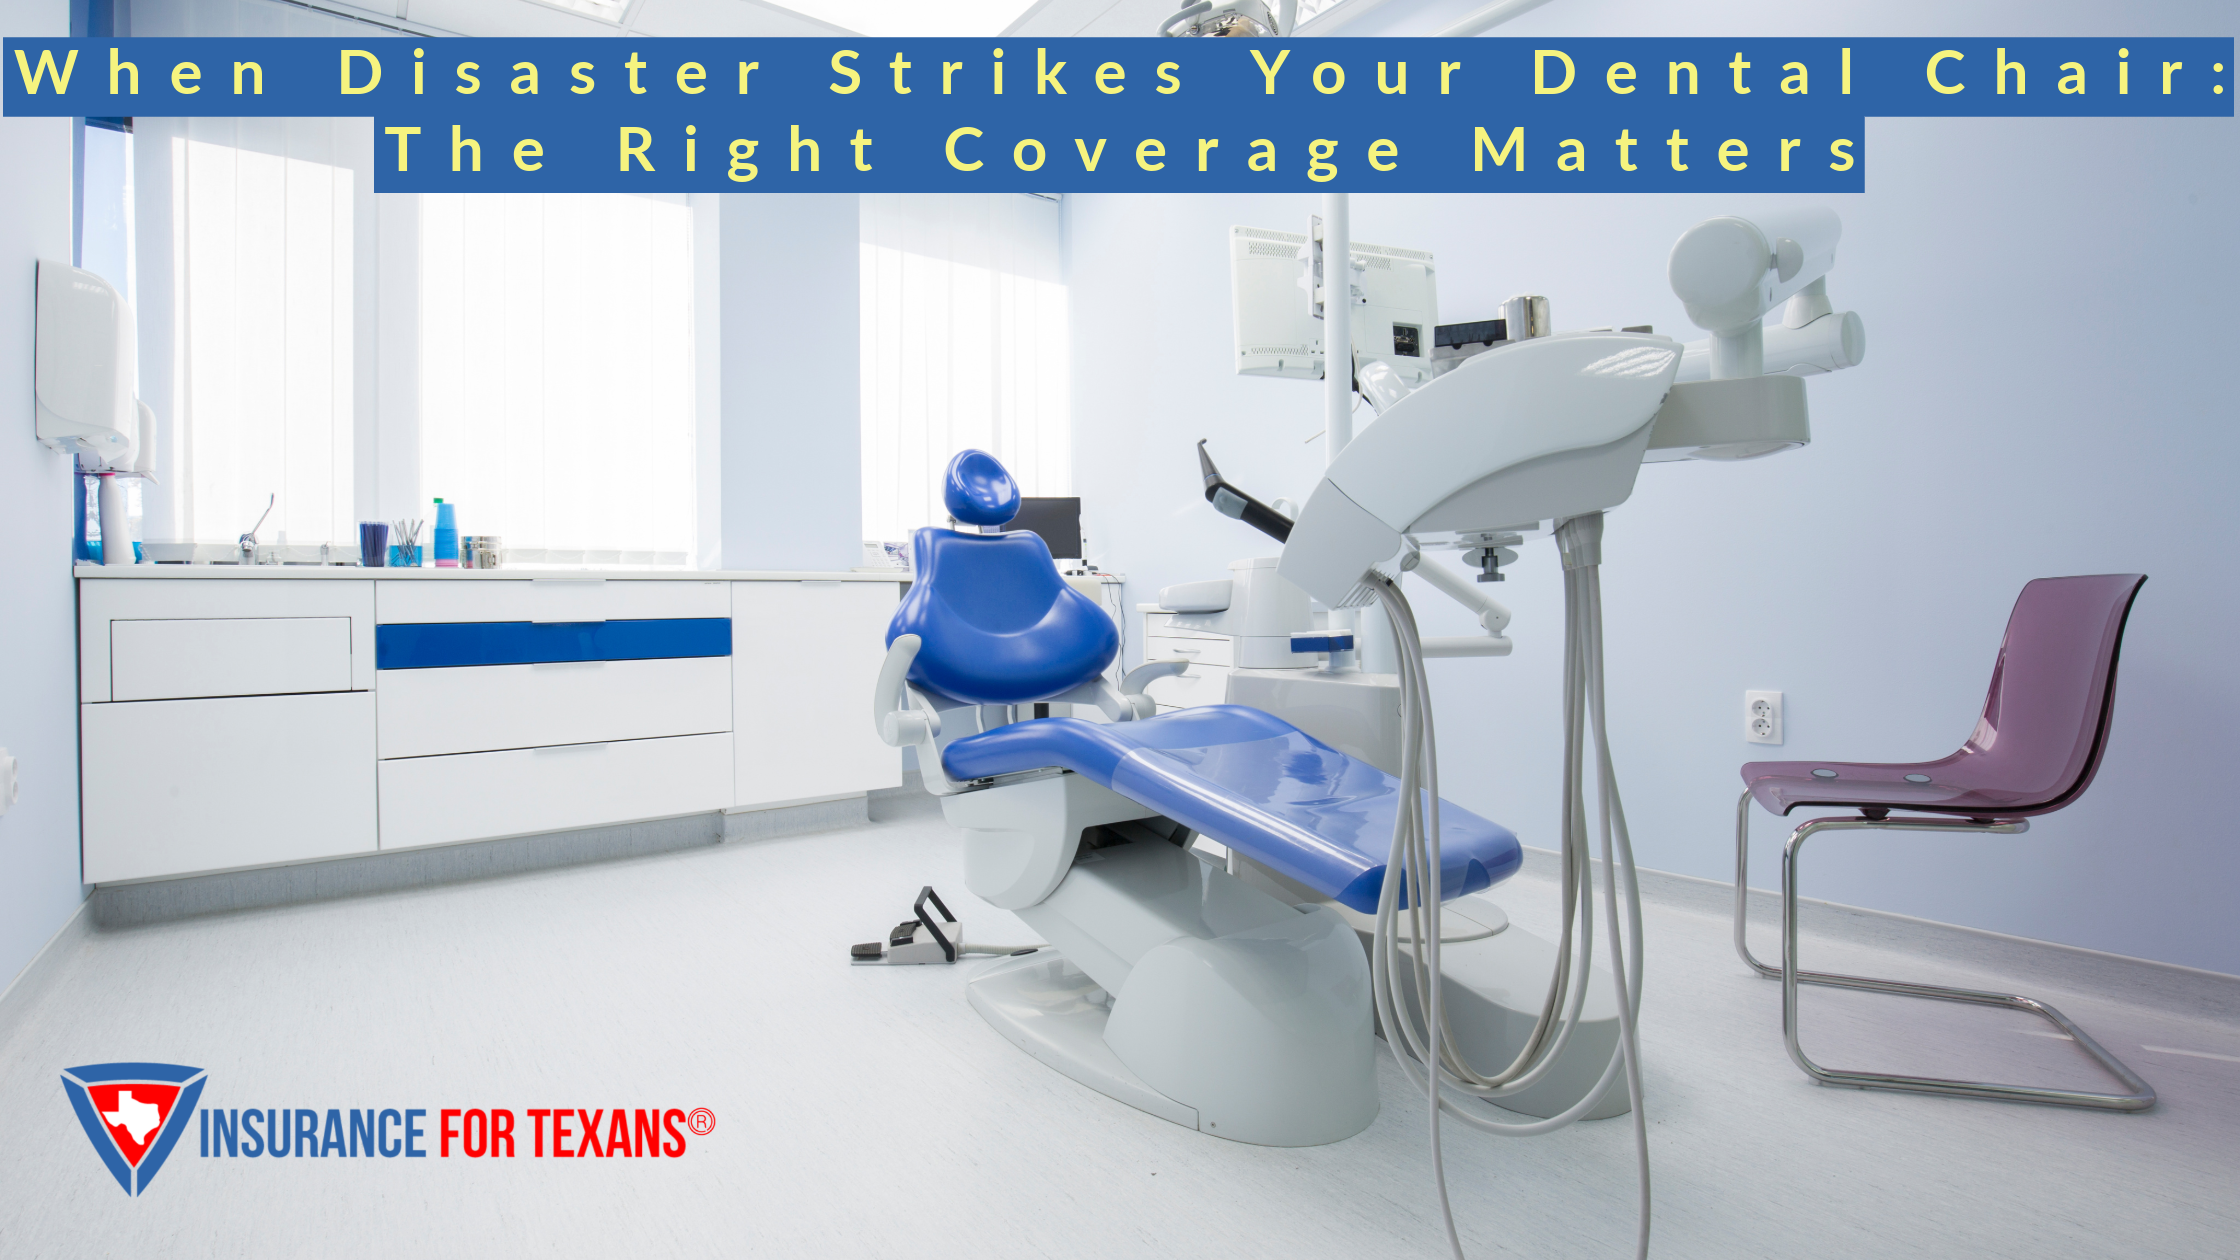 When Disaster Strikes Your Dental Chair: The Right Coverage Matters